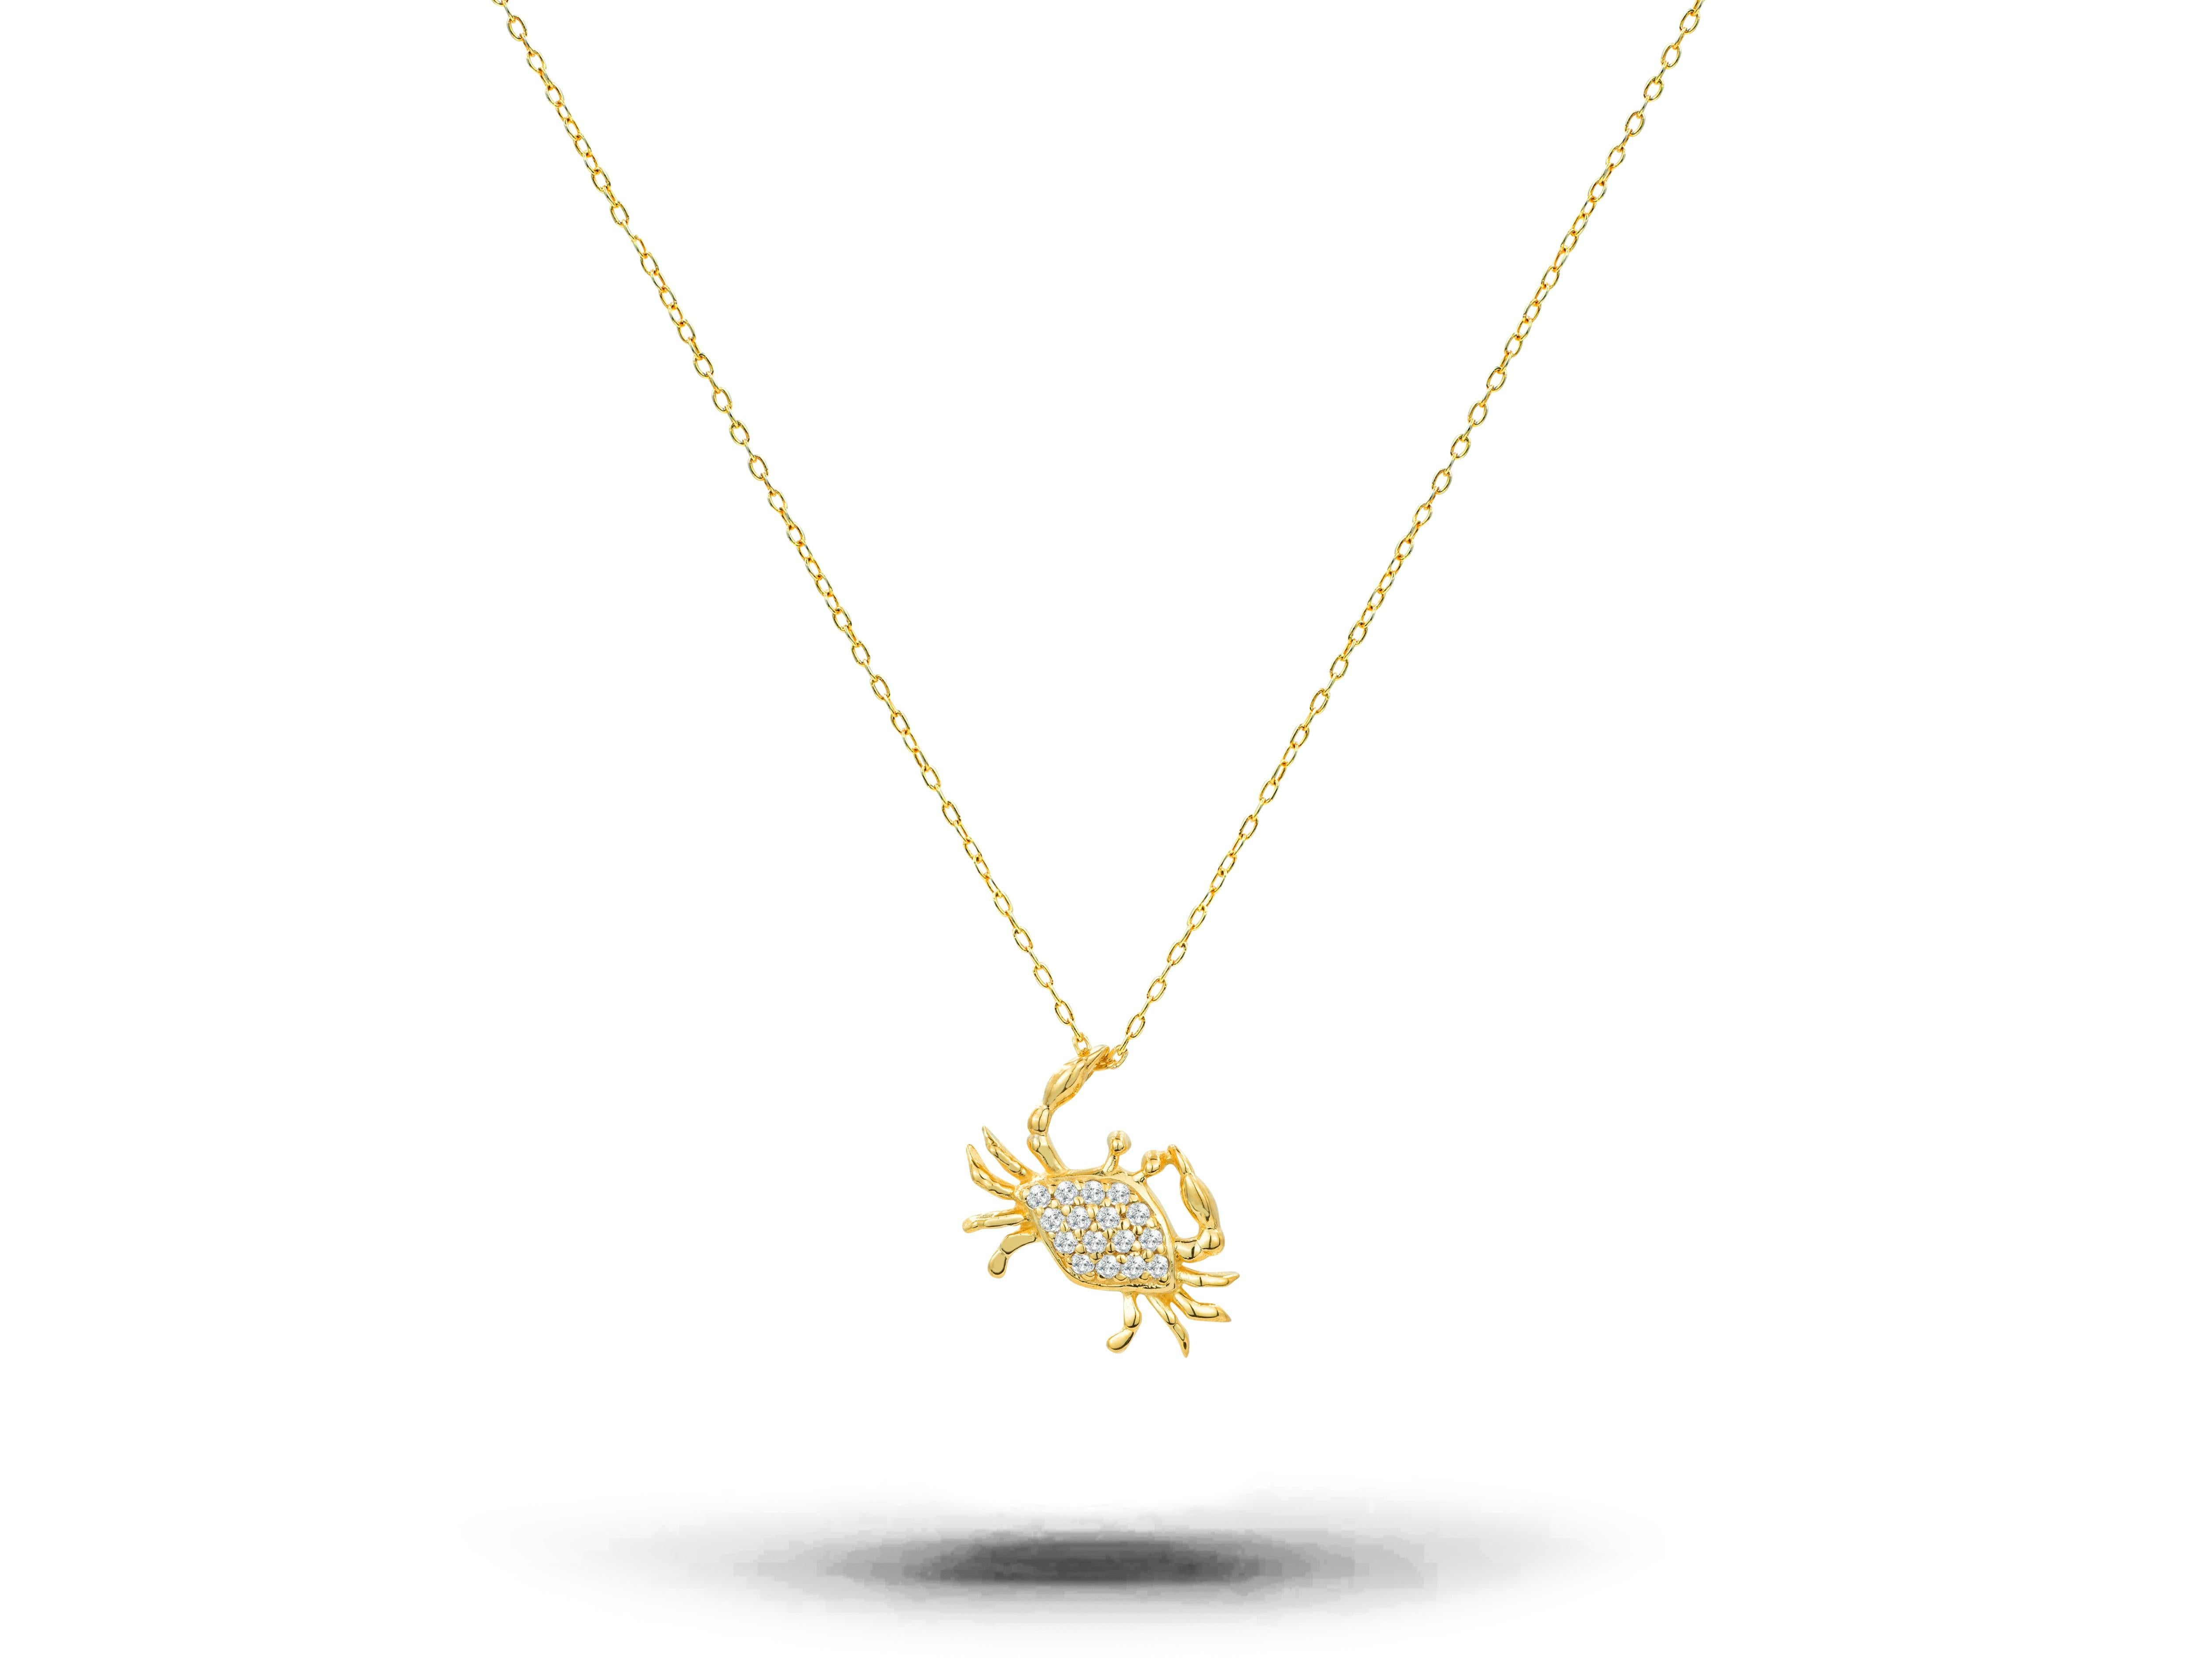 crab necklace meaning